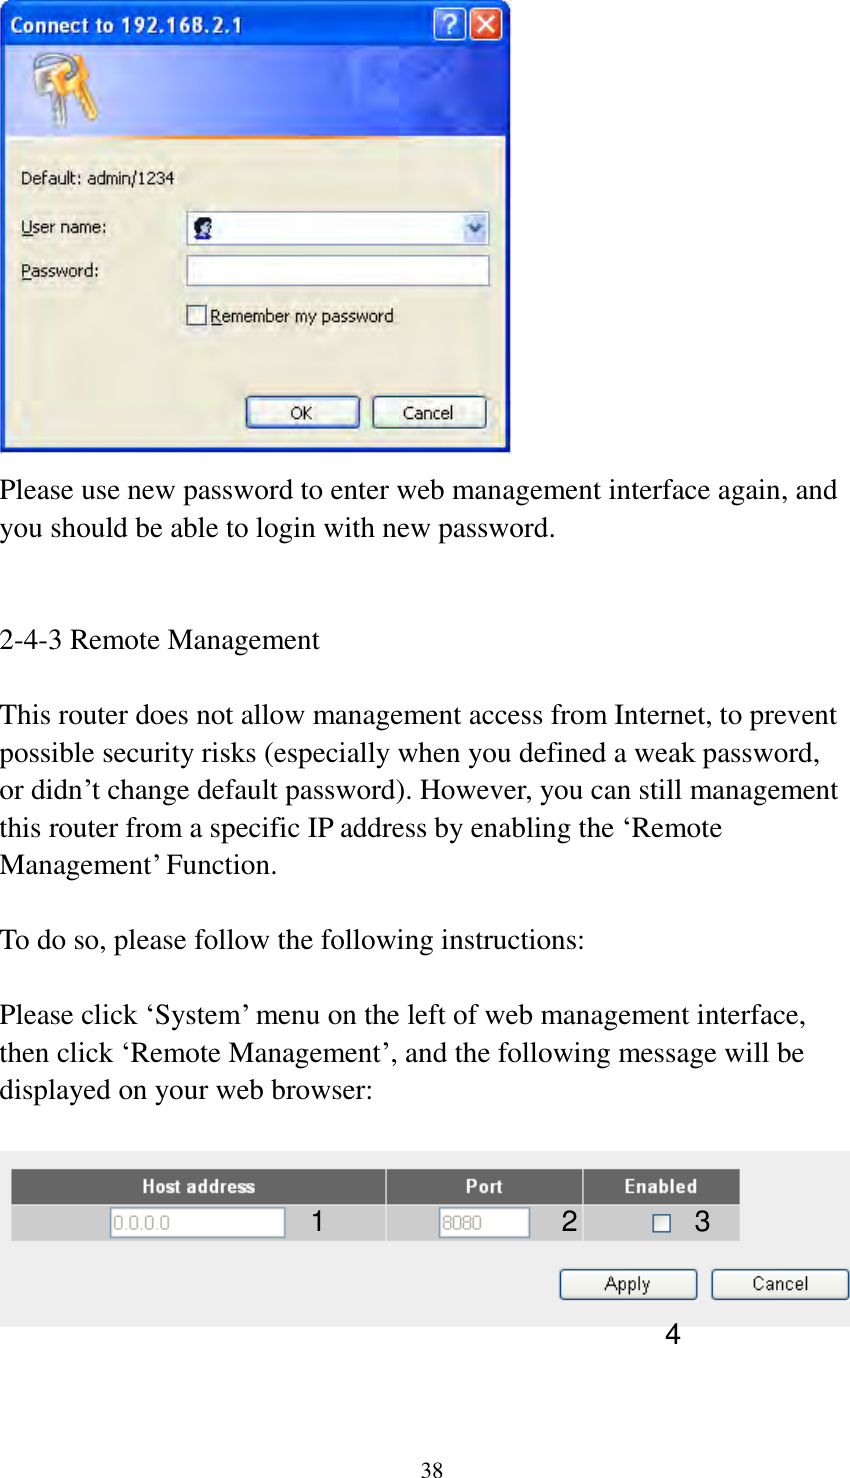 38  Please use new password to enter web management interface again, and you should be able to login with new password.   2-4-3 Remote Management  This router does not allow management access from Internet, to prevent possible security risks (especially when you defined a weak password, or didn‟t change default password). However, you can still management this router from a specific IP address by enabling the „Remote Management‟ Function.  To do so, please follow the following instructions:  Please click „System‟ menu on the left of web management interface, then click „Remote Management‟, and the following message will be displayed on your web browser:     1 2 3 4 